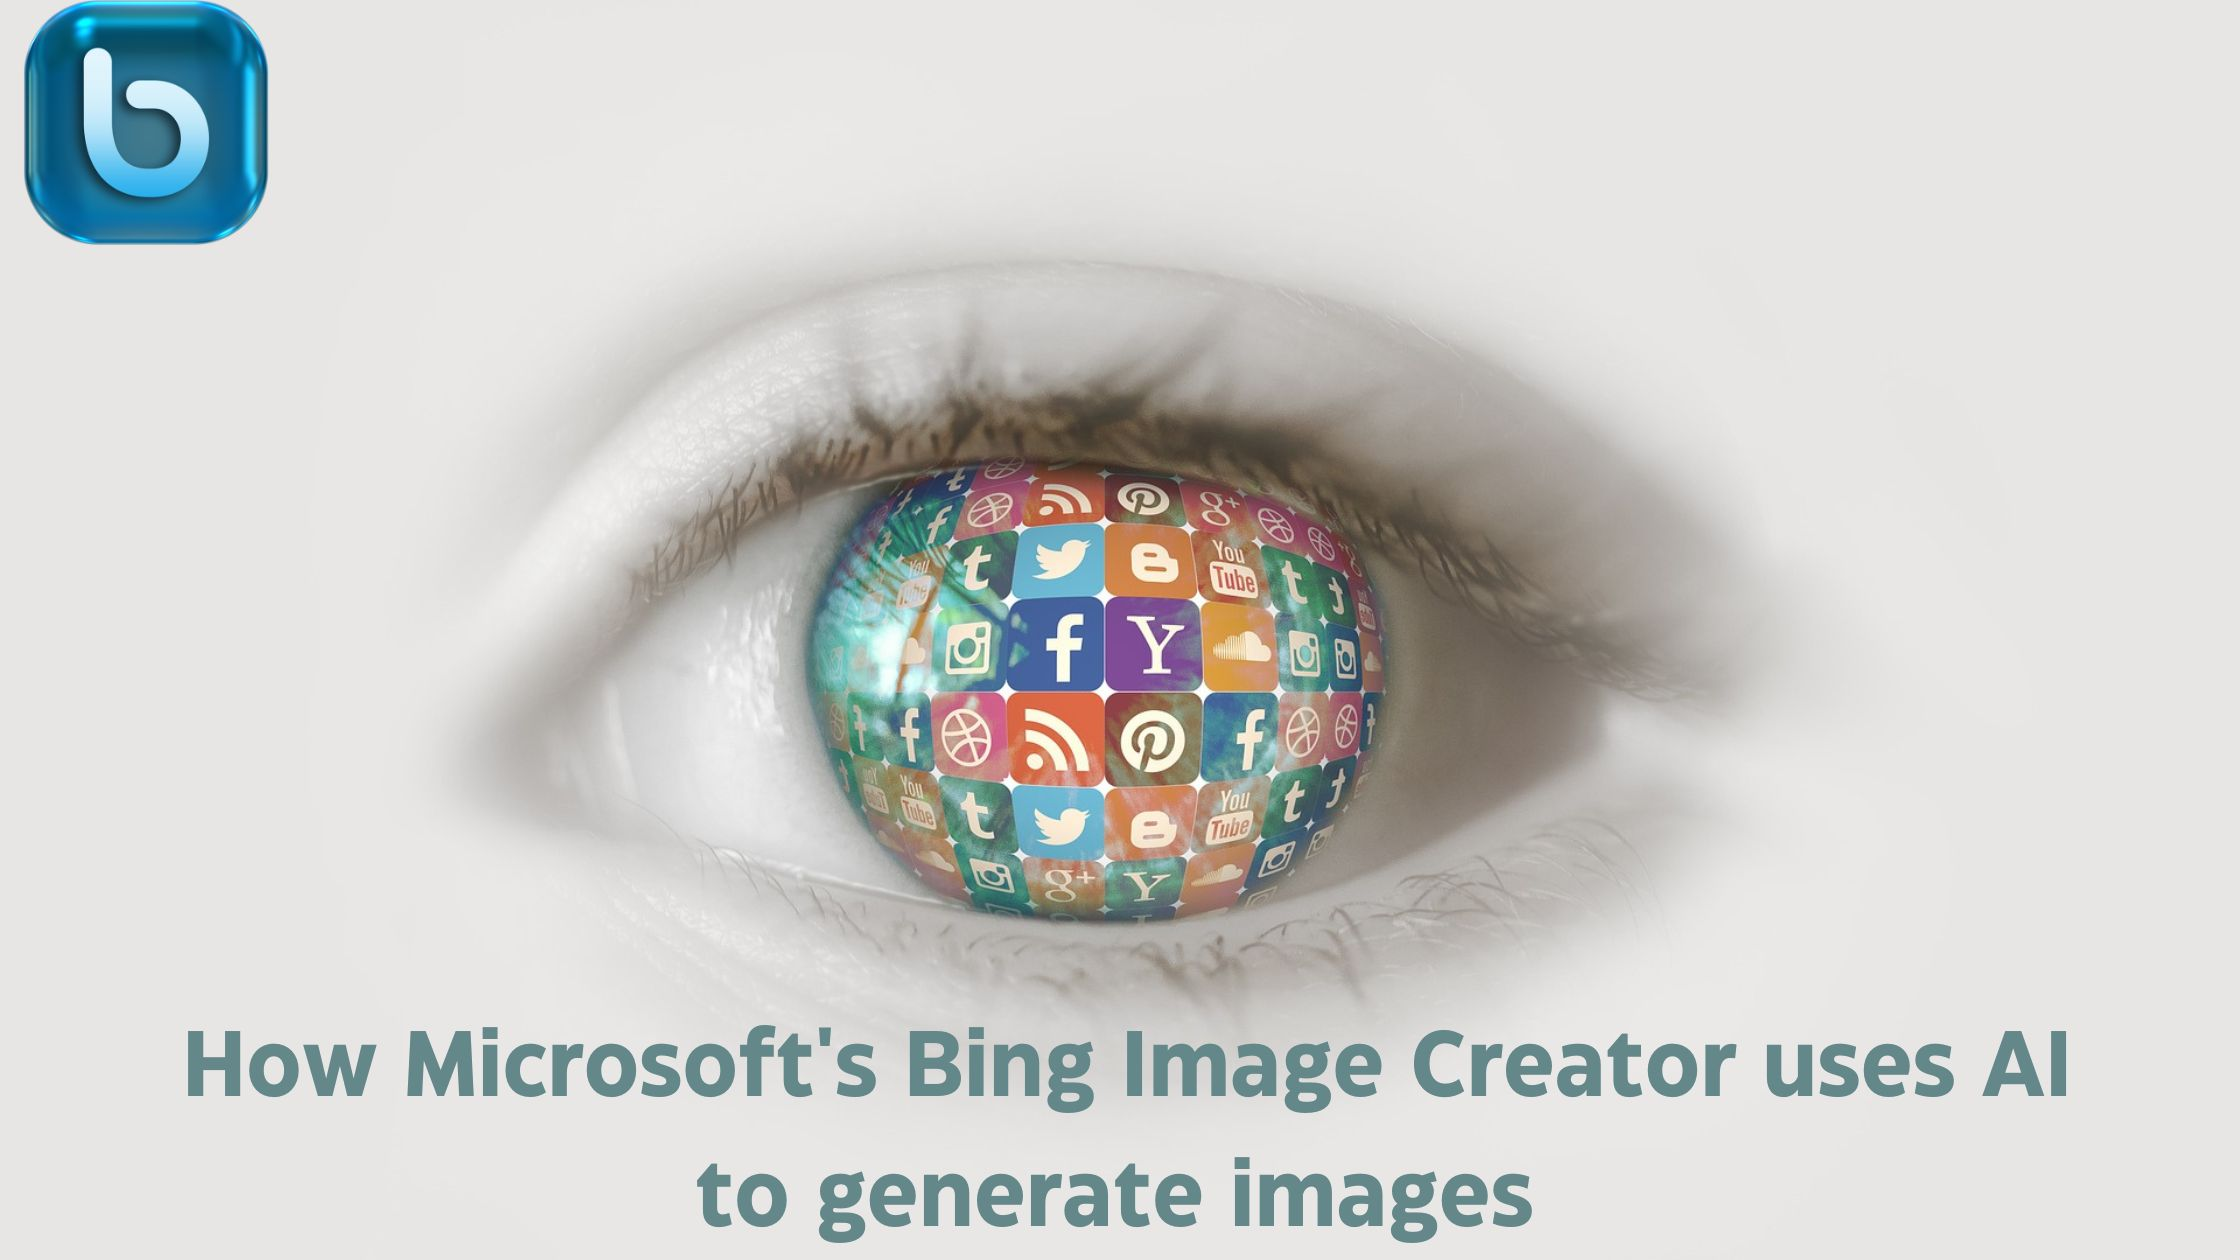 How Microsoft's Bing Image Creator uses AI to generate images